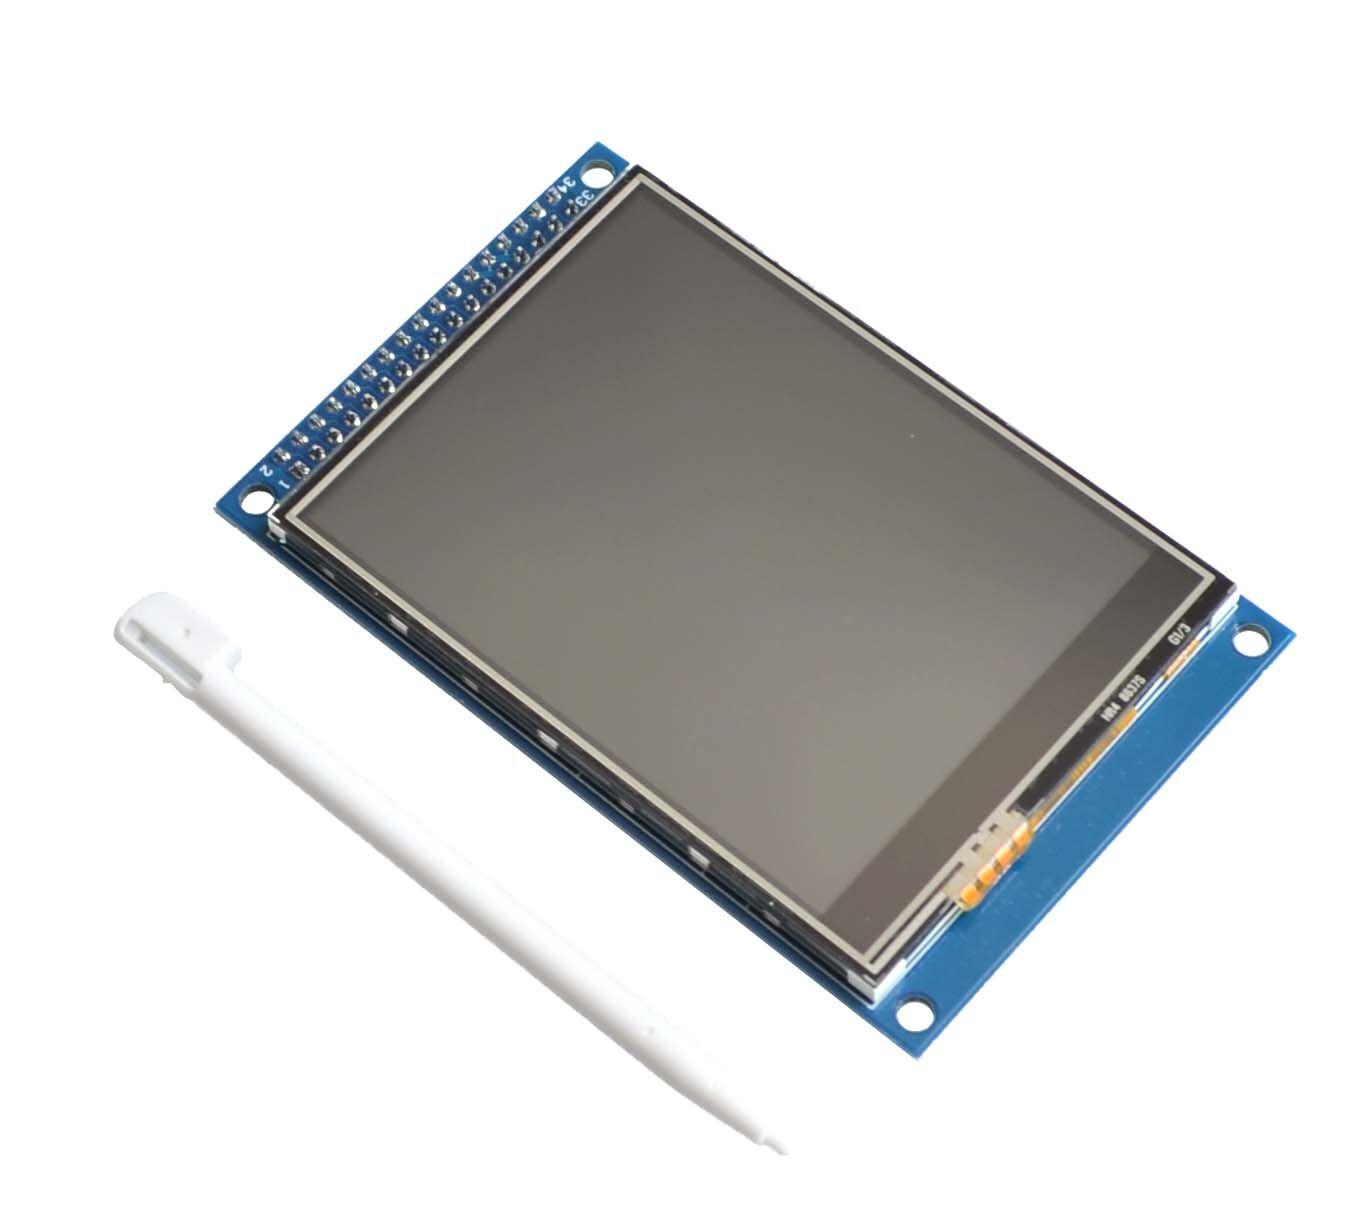 LCD 3.2 inch TFT Touch Screen Module Display Ultra HD ILI9341 for STM32 240x320 240*320 for arduino Diy Kit